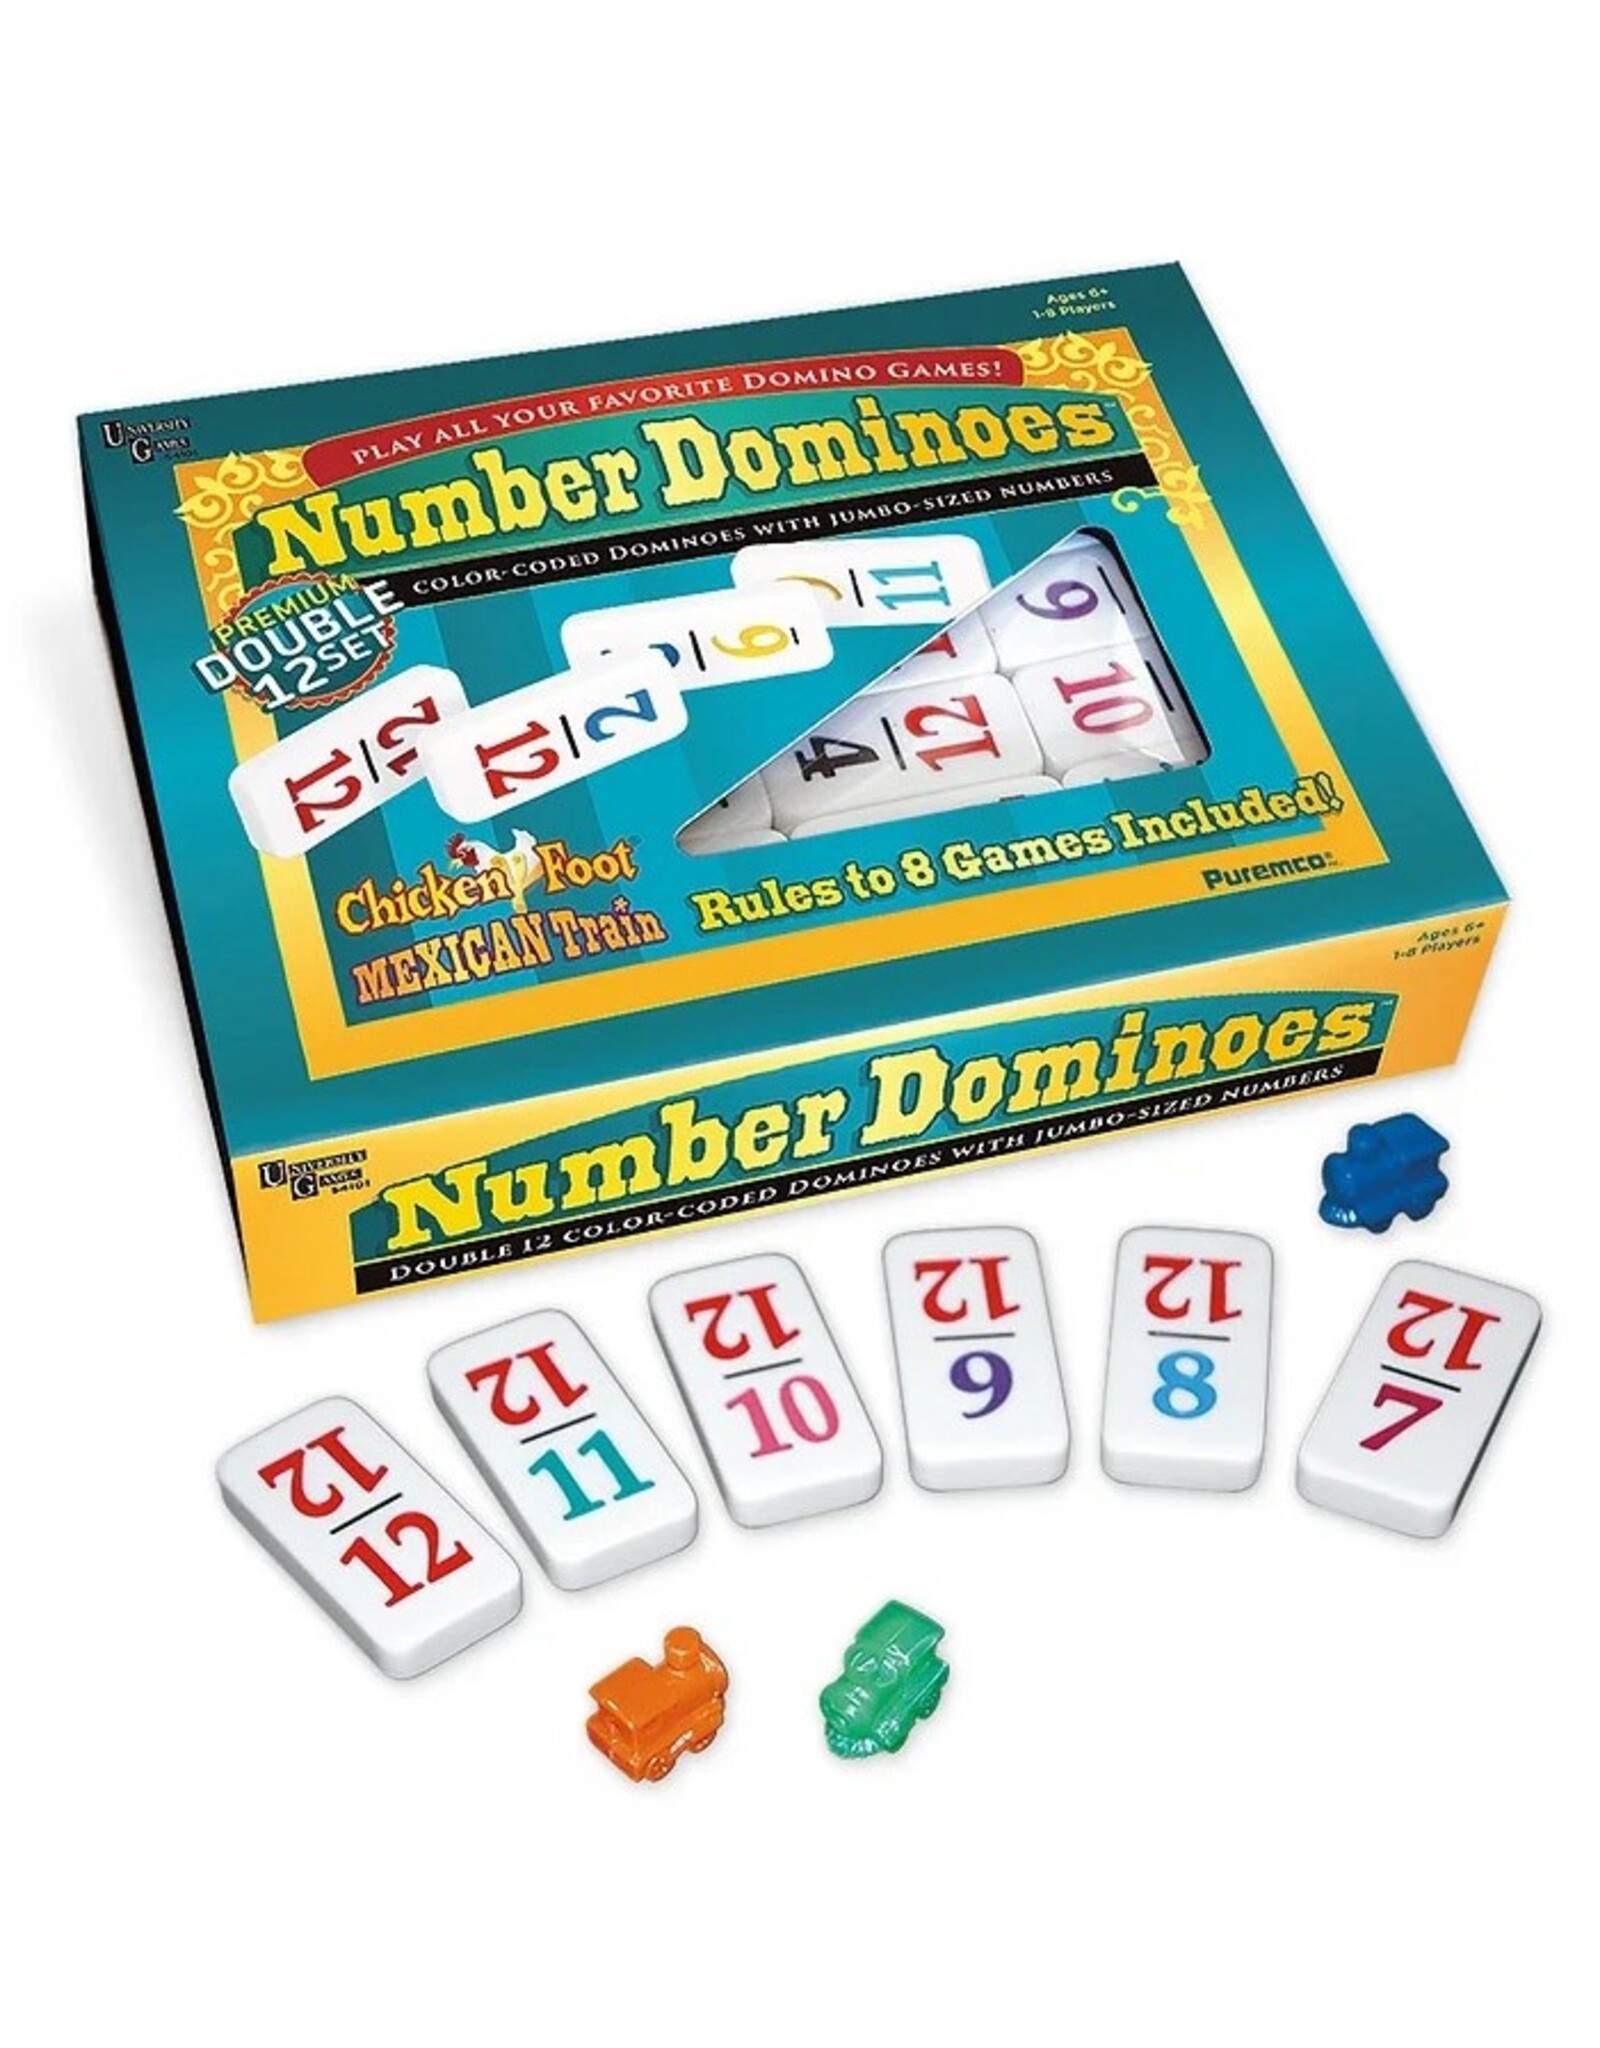 University Games Dominoes: Double 12 Numbered